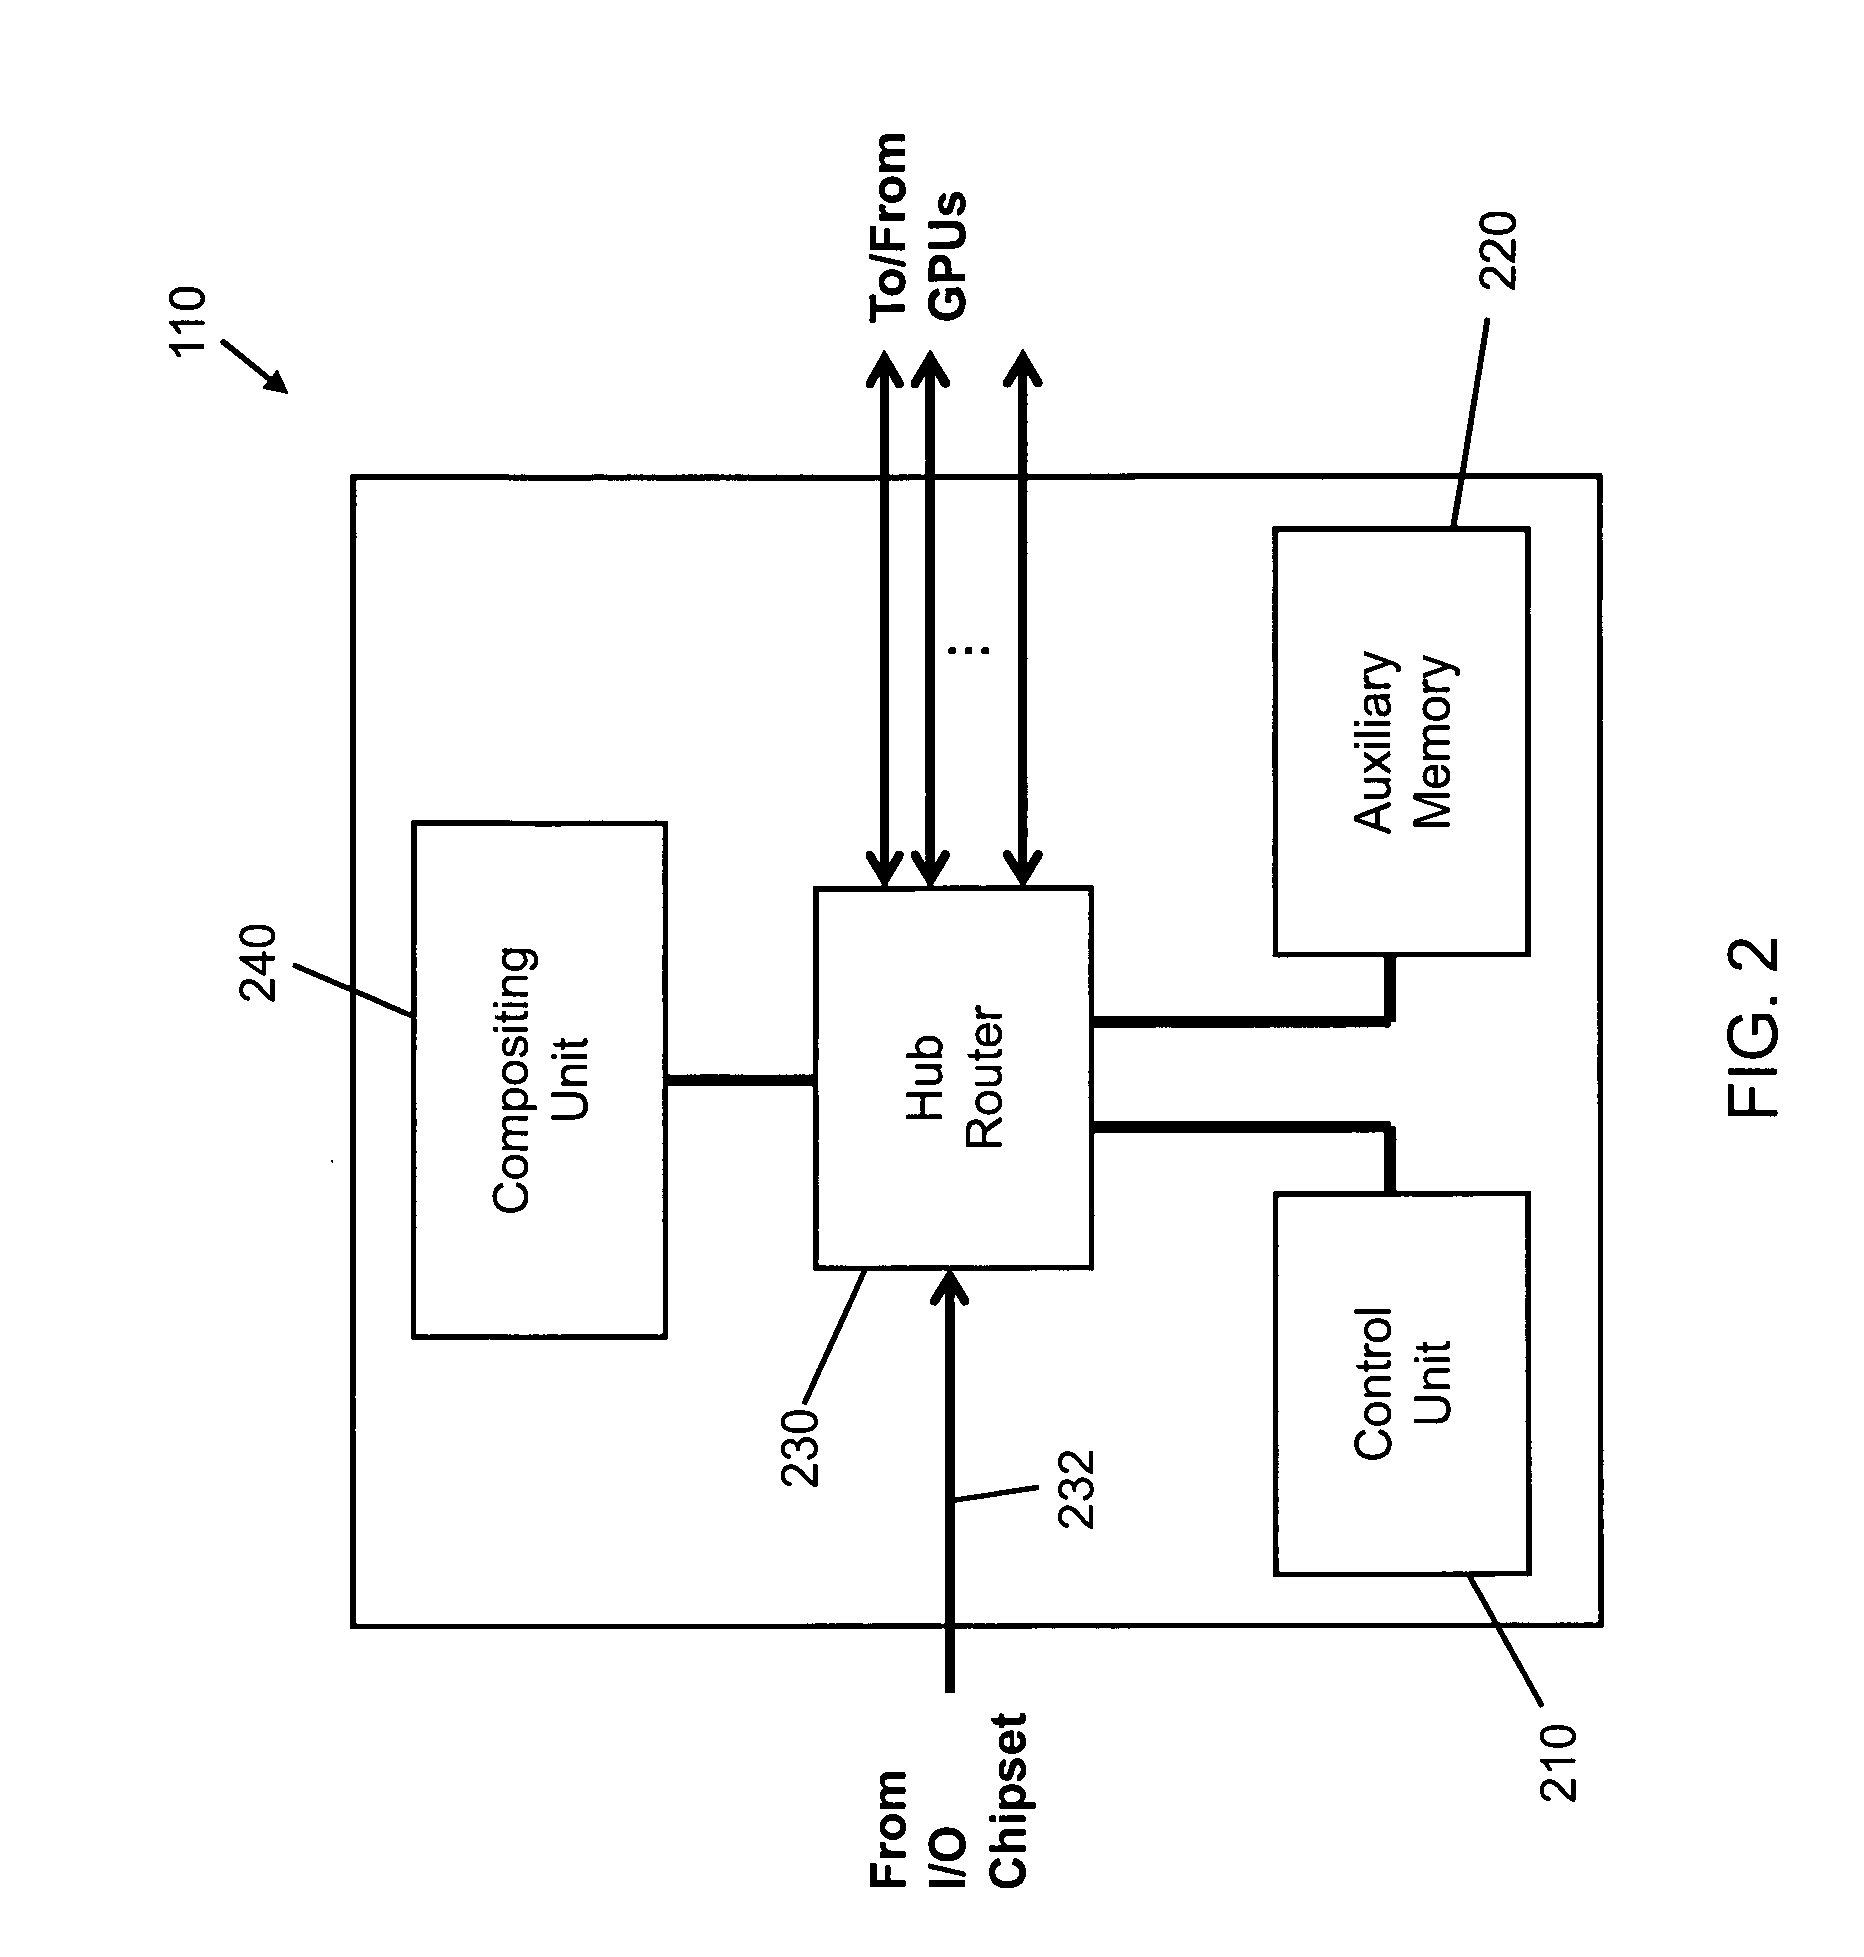 PC-based computing system employing a multi-GPU graphics pipeline architecture supporting multiple modes of GPU parallelization dymamically controlled while running a graphics application